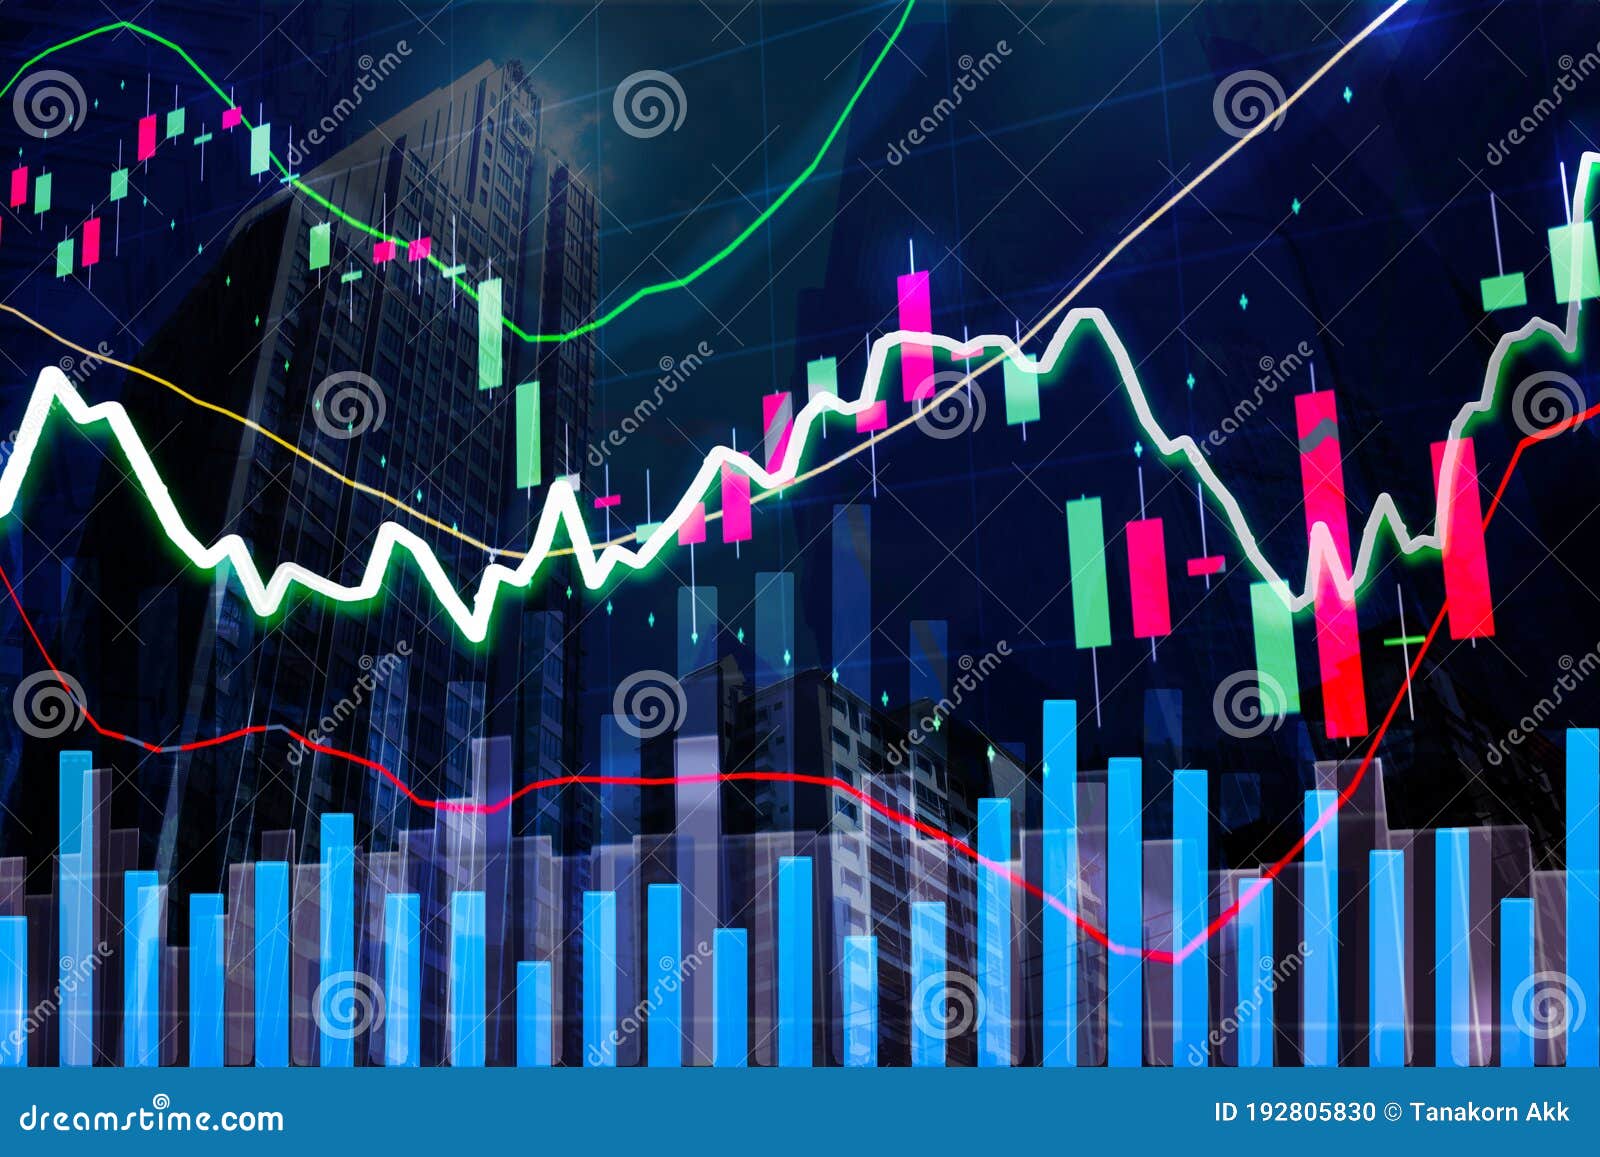 stock market graph in modern building city sky, concept for stock trading and financial markets,